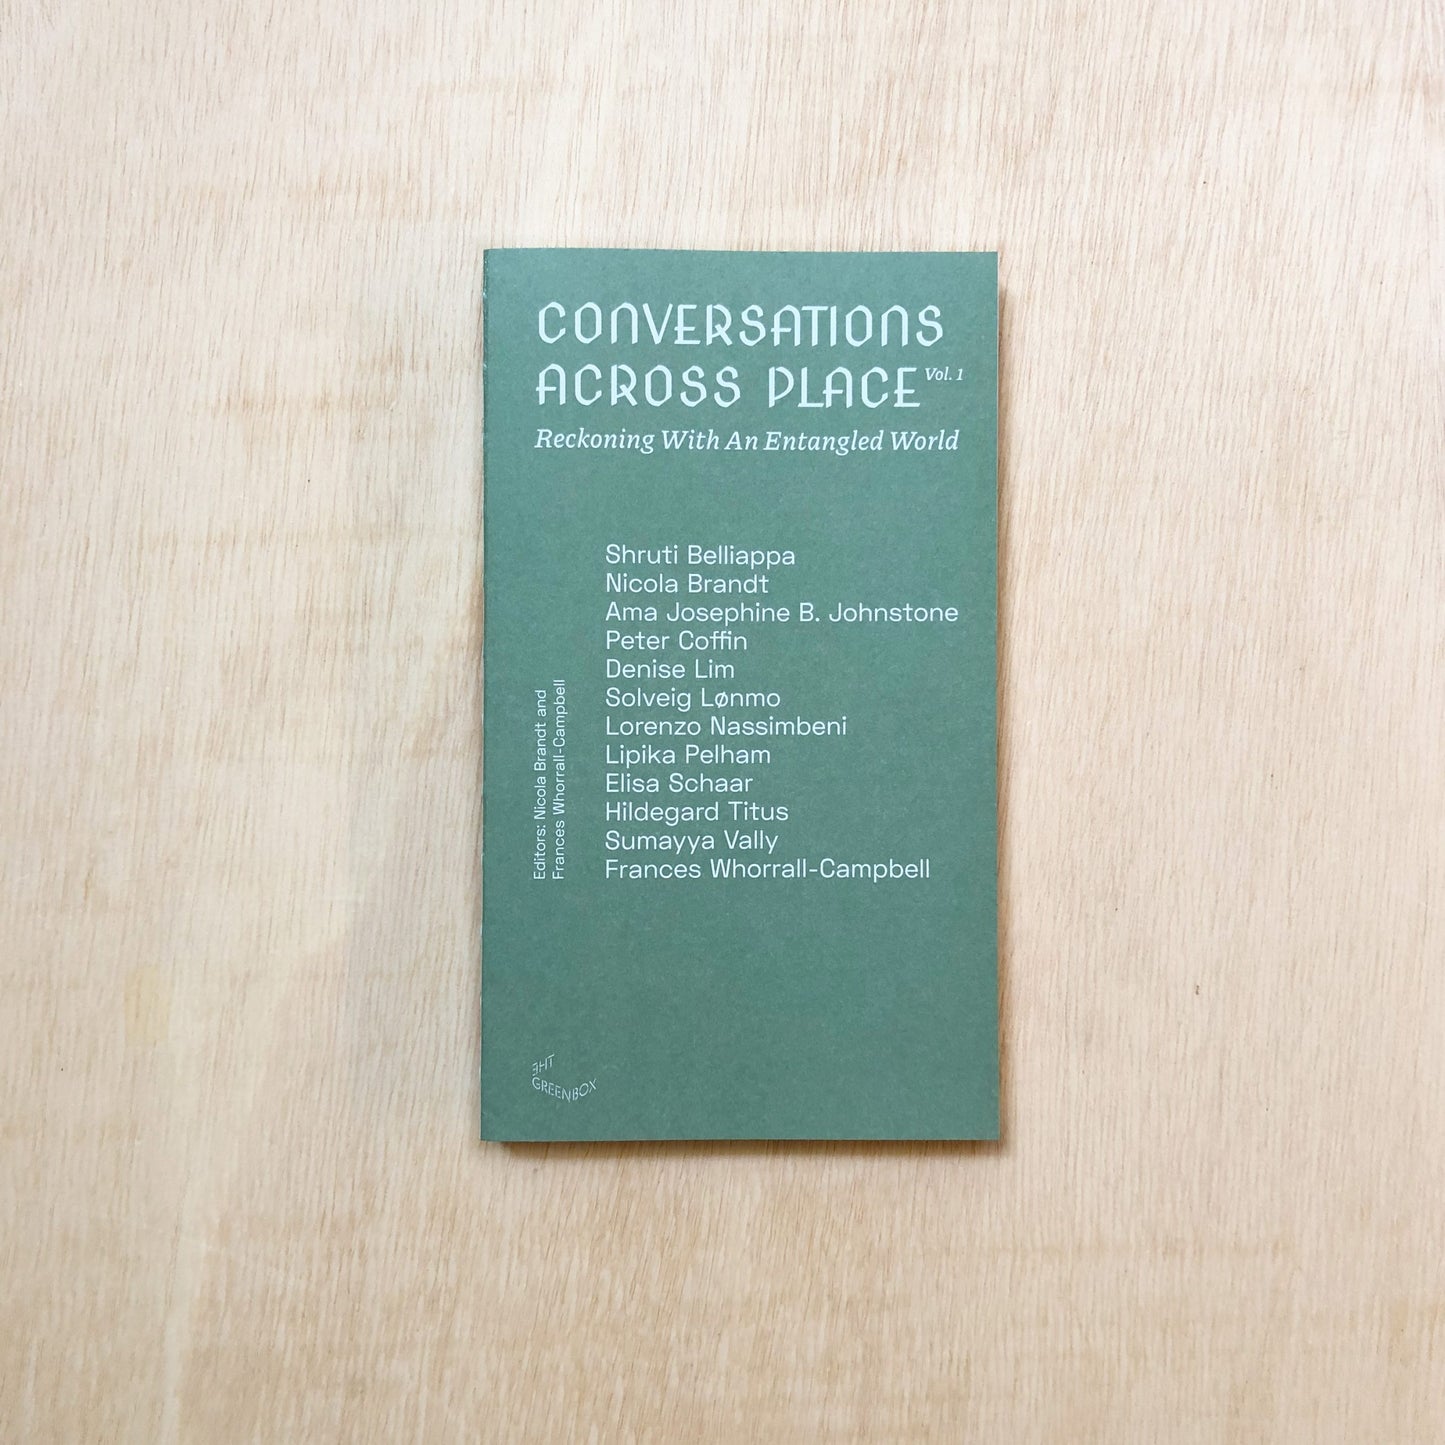 Conversations Across Place Vol.1 - Reckoning With An Entangled World